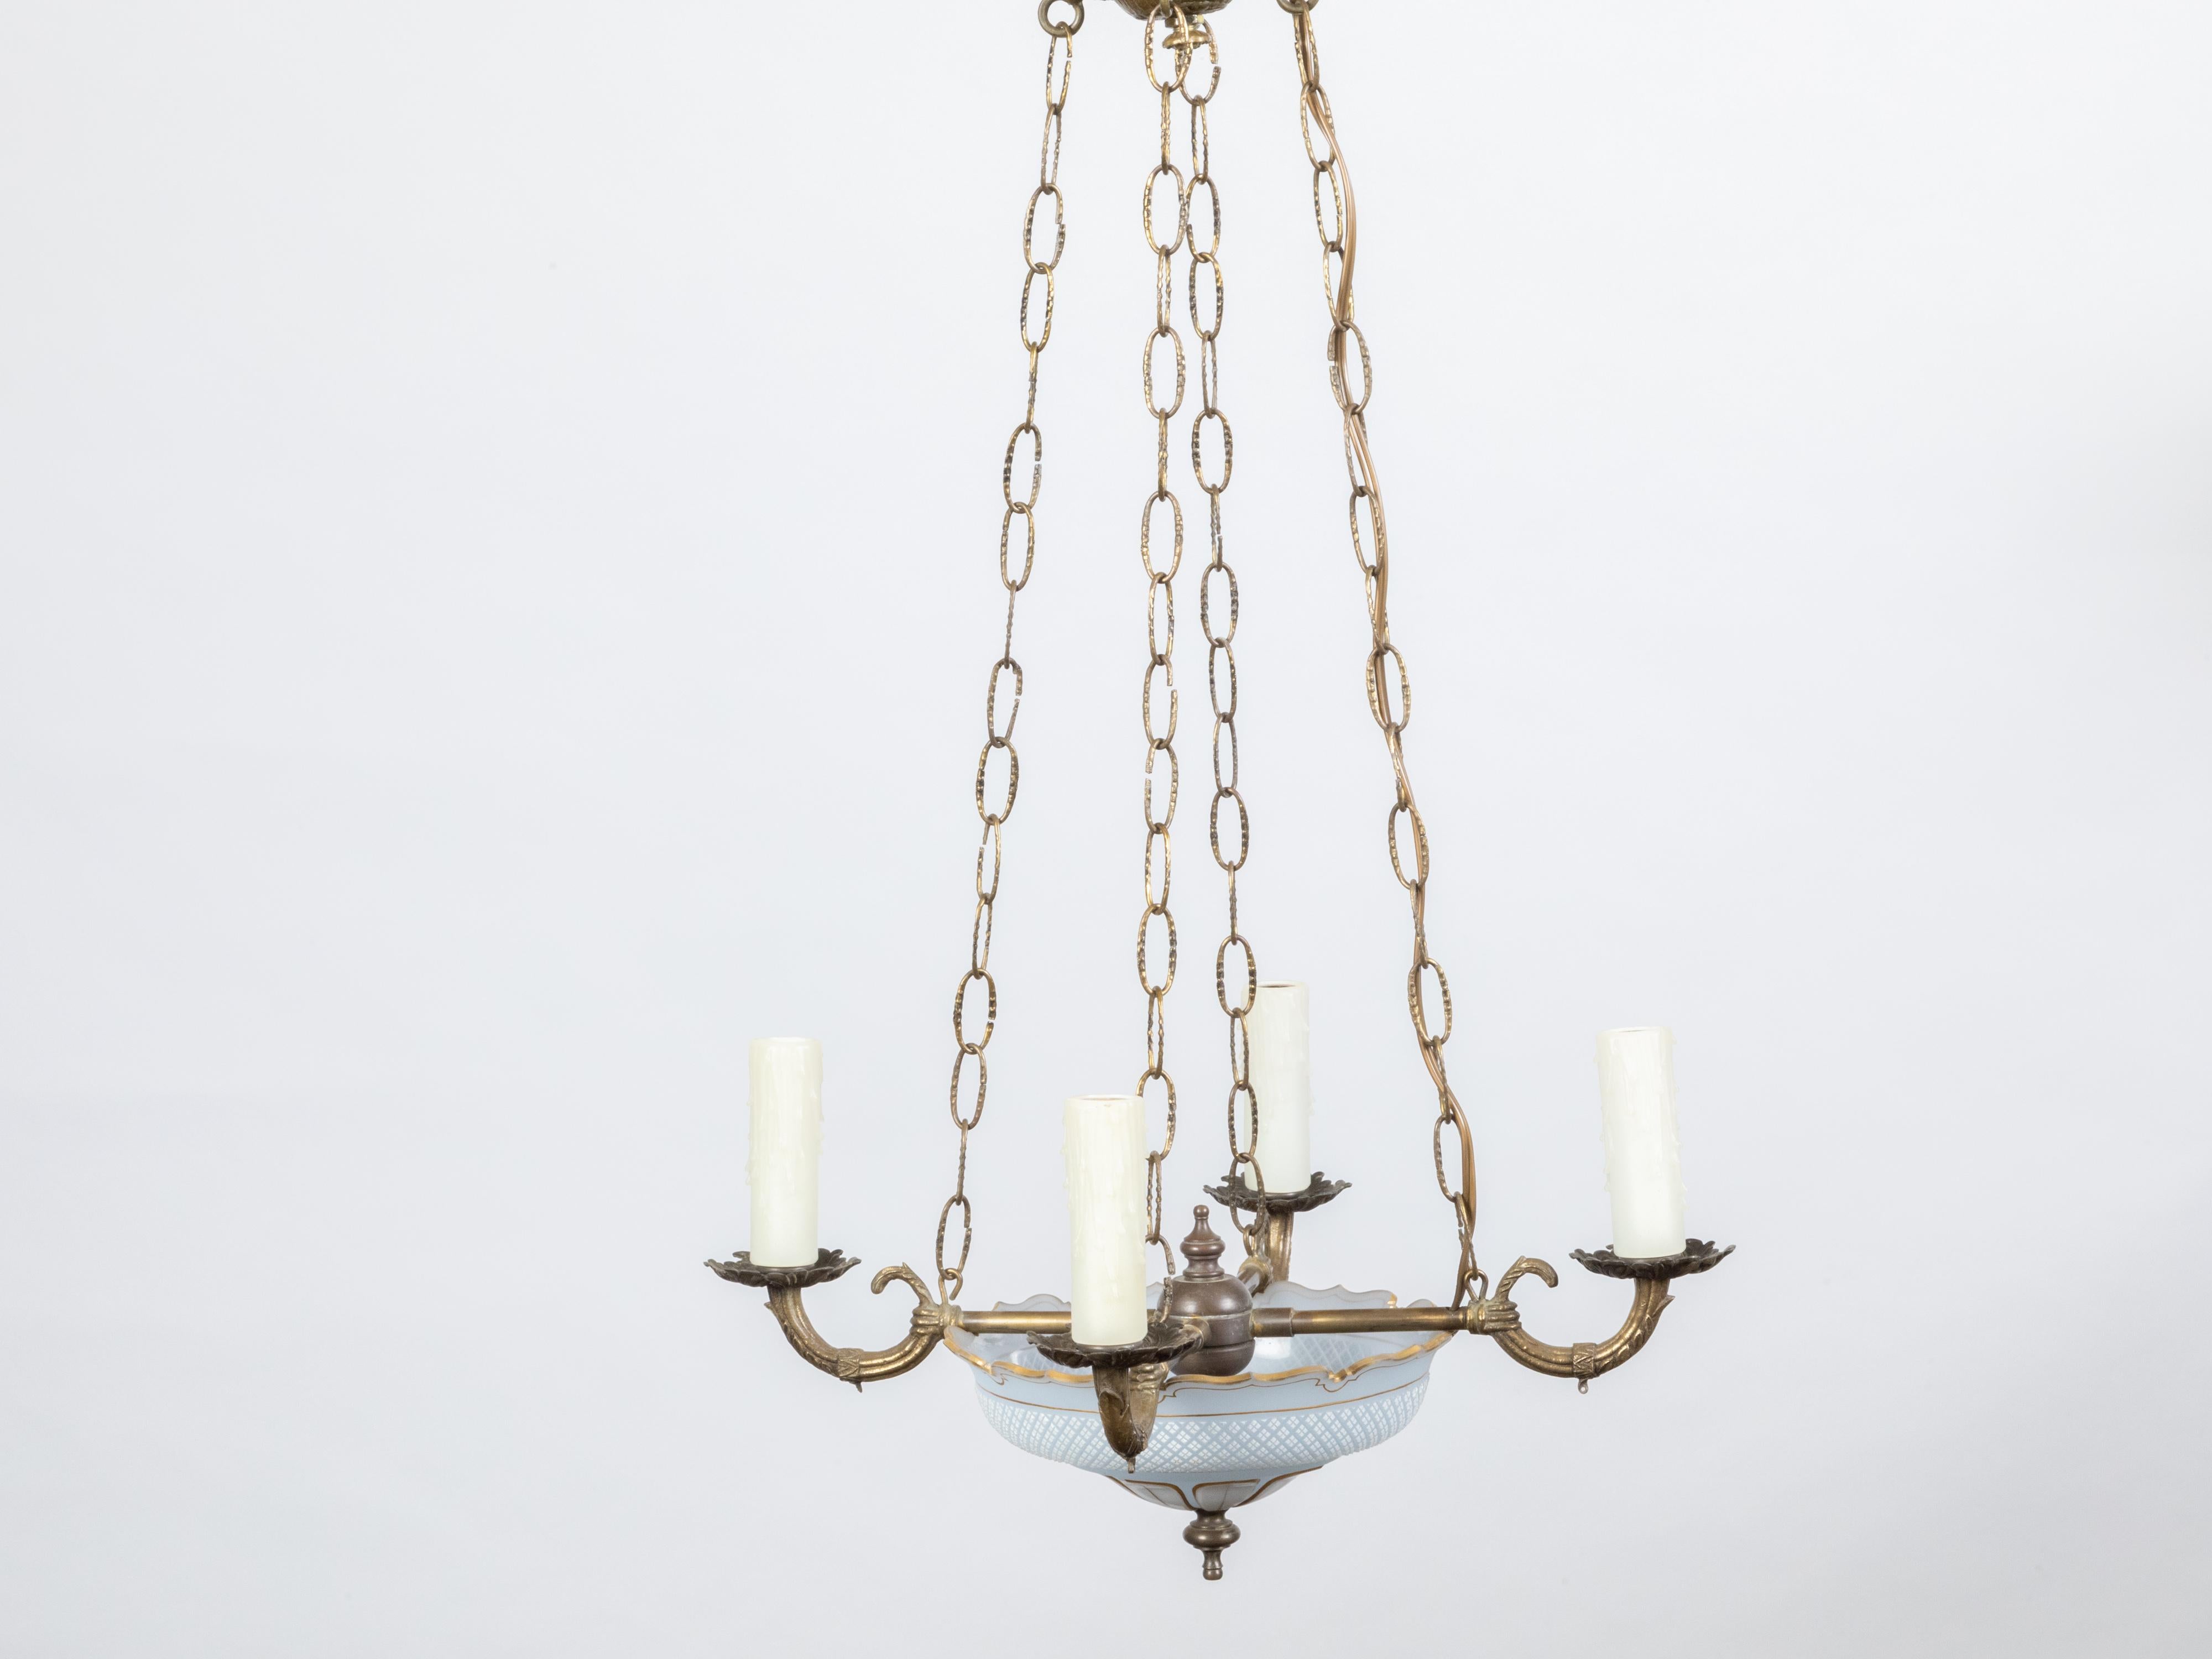 A French opaline chandelier from the early 20th century, with four lights and profiled links. Created in France at the Turn of the Century, this chandelier features an opaline basket with cross hatched patterns and leaf motifs, delicately